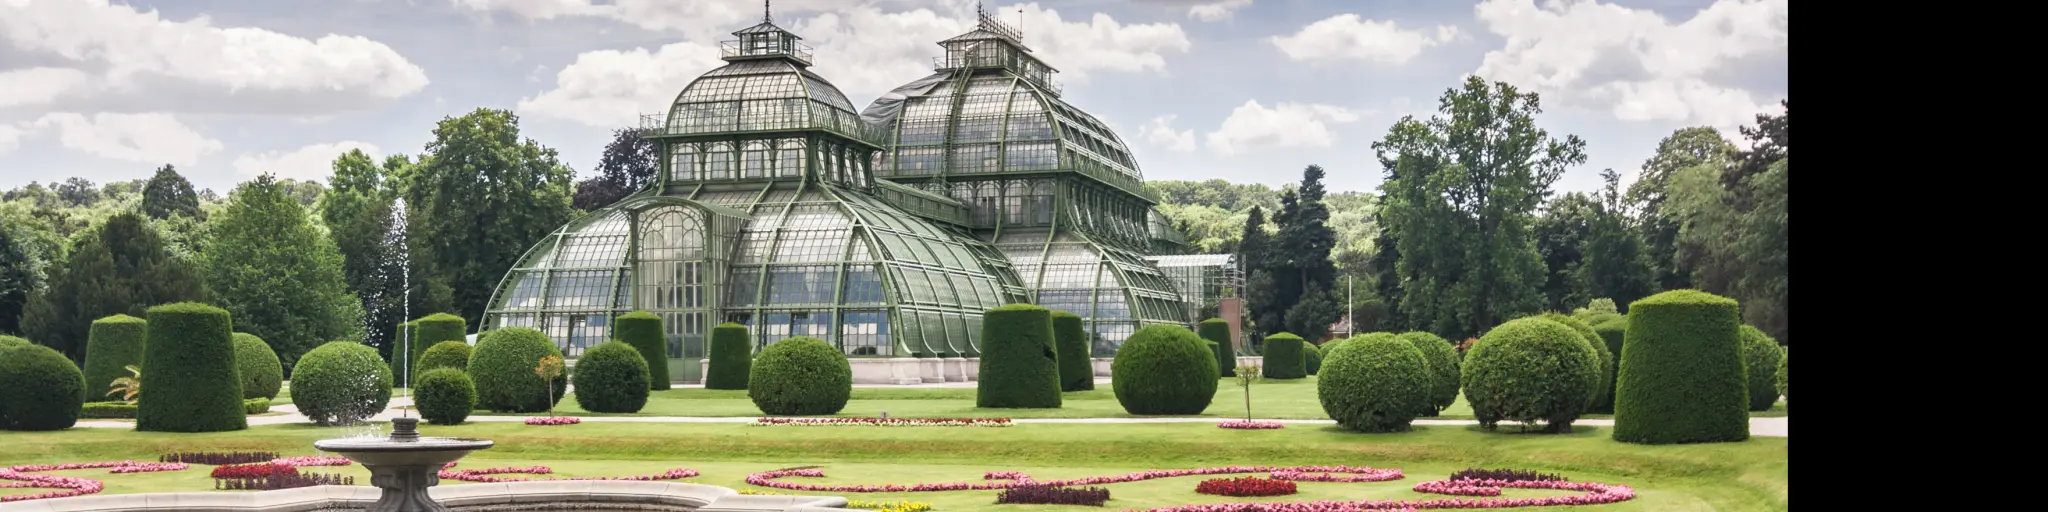 The ultimate weekend in Vienna at the Palmenhaus park